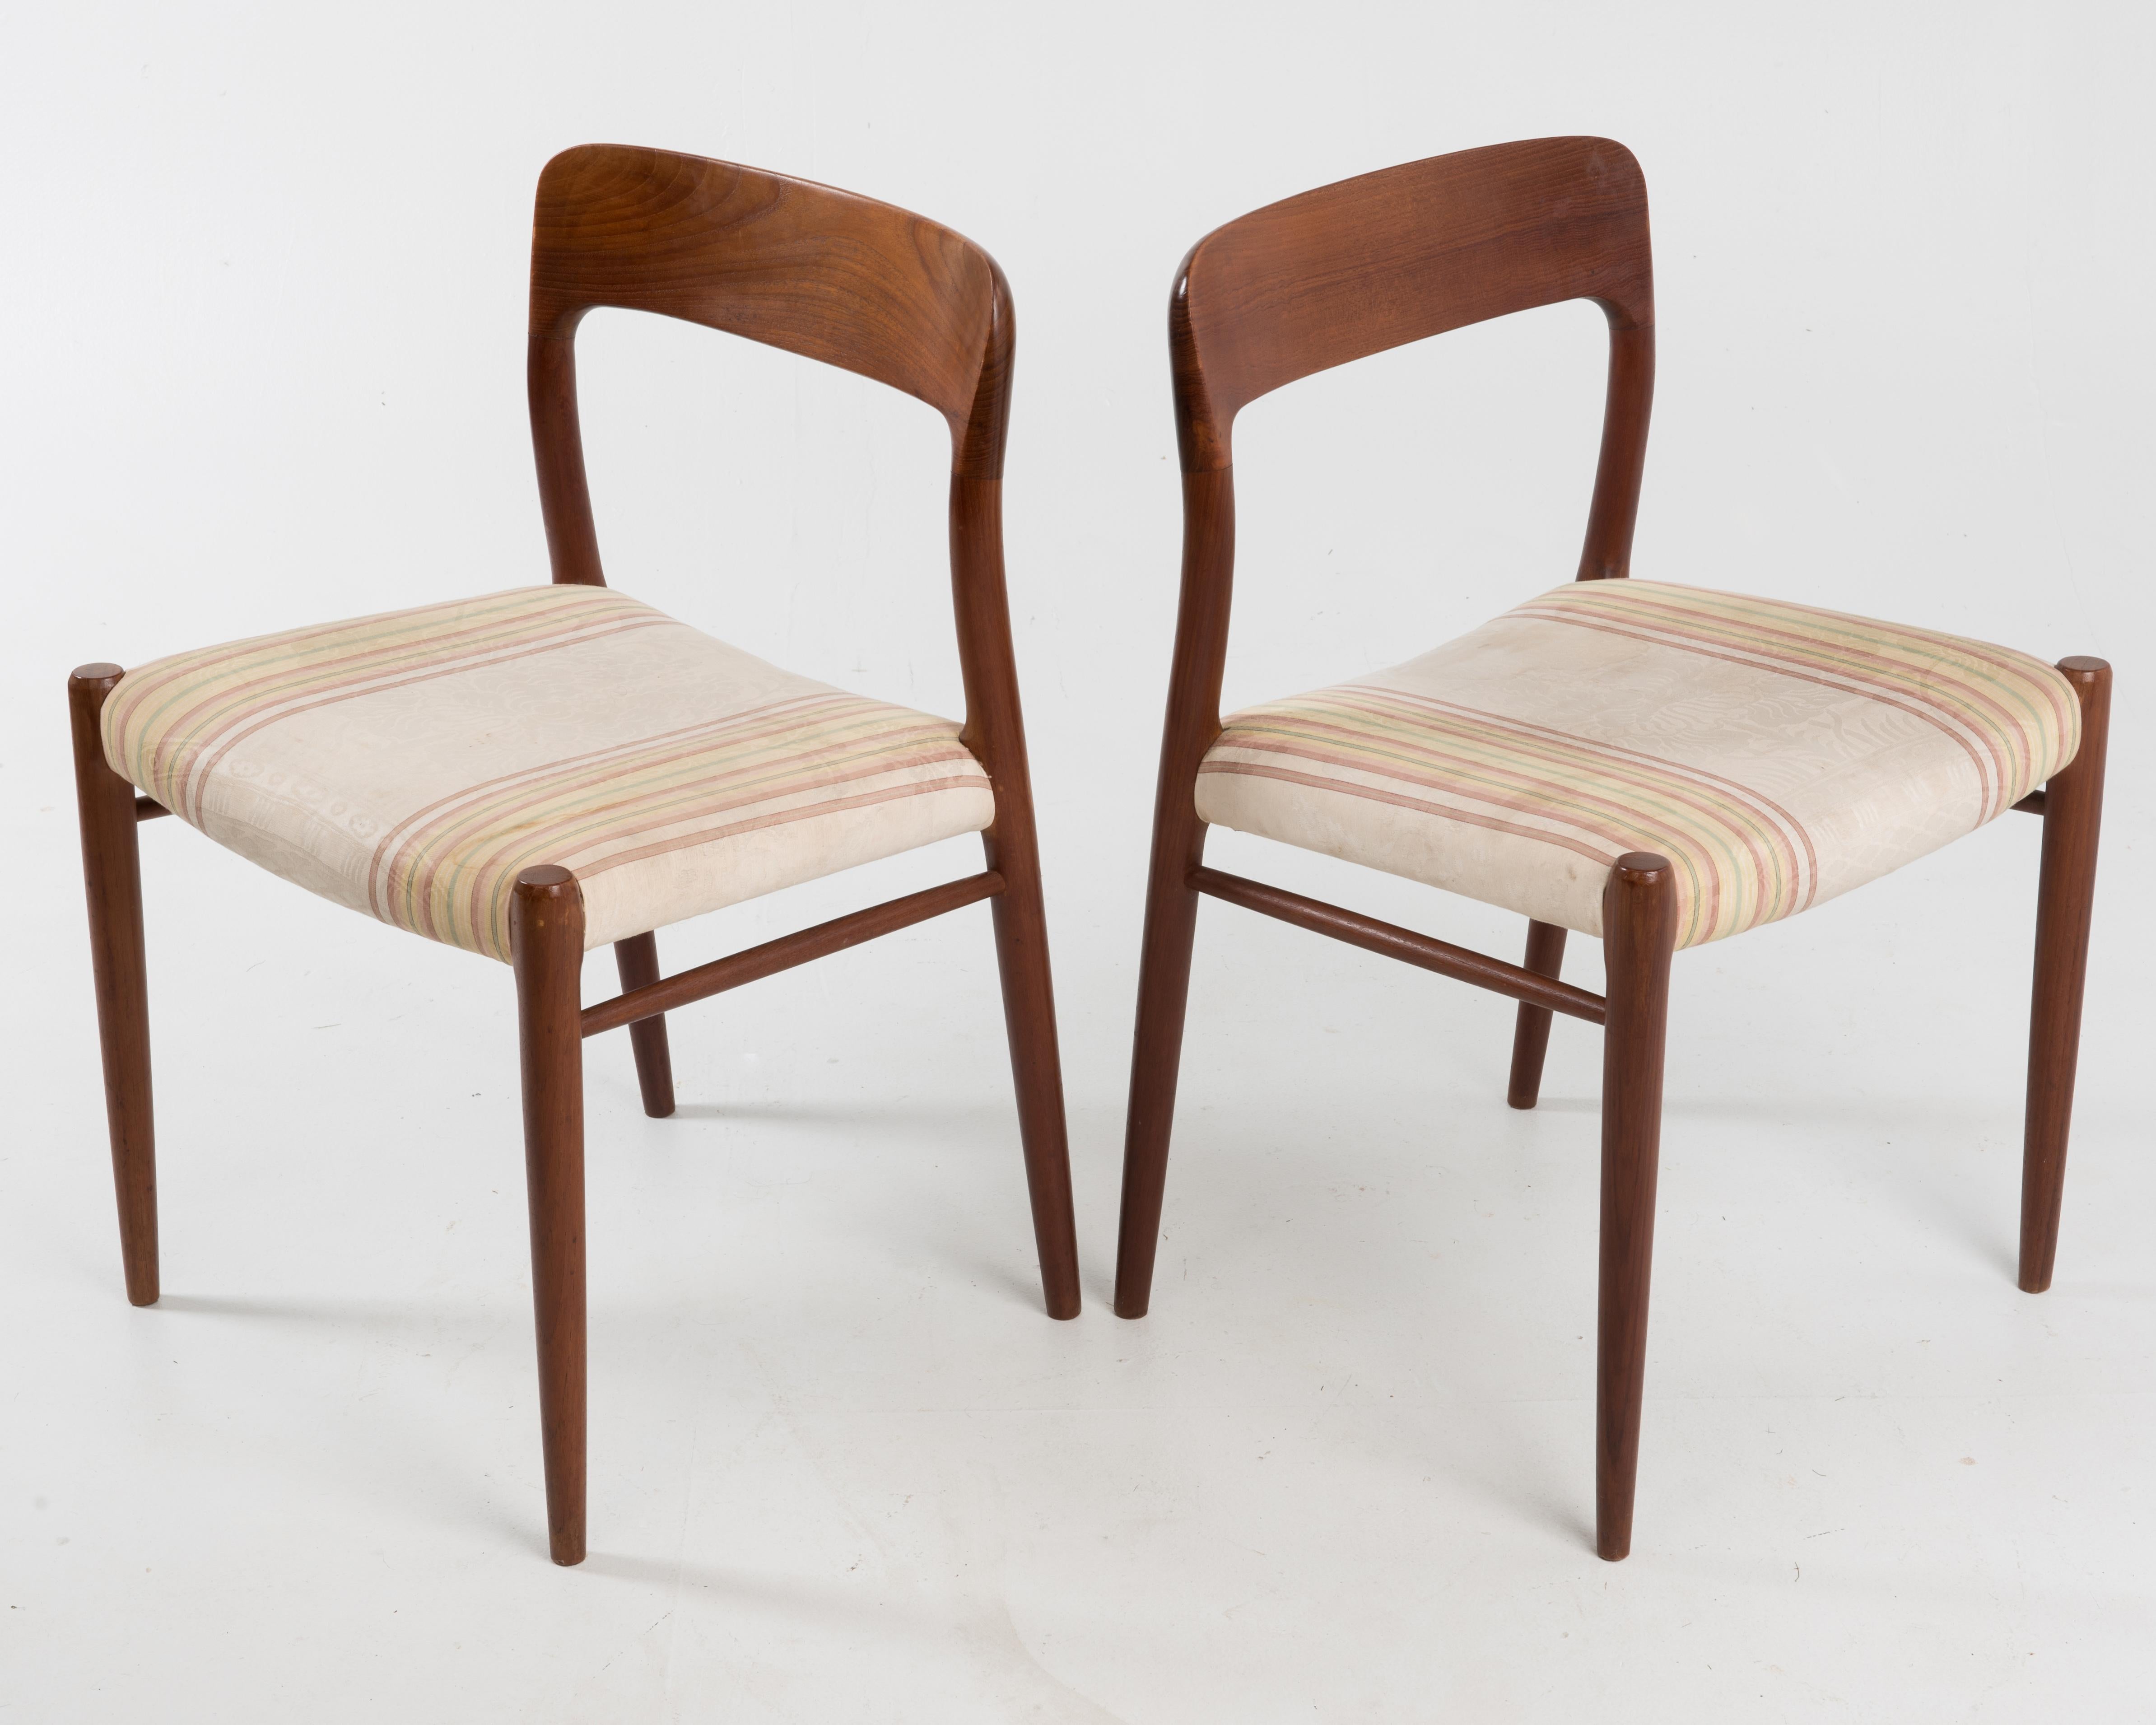 Mid-20th Century Niels Möller for J.L. Möllers Style Modell 75 Danish Teak Dining Chairs, Pair